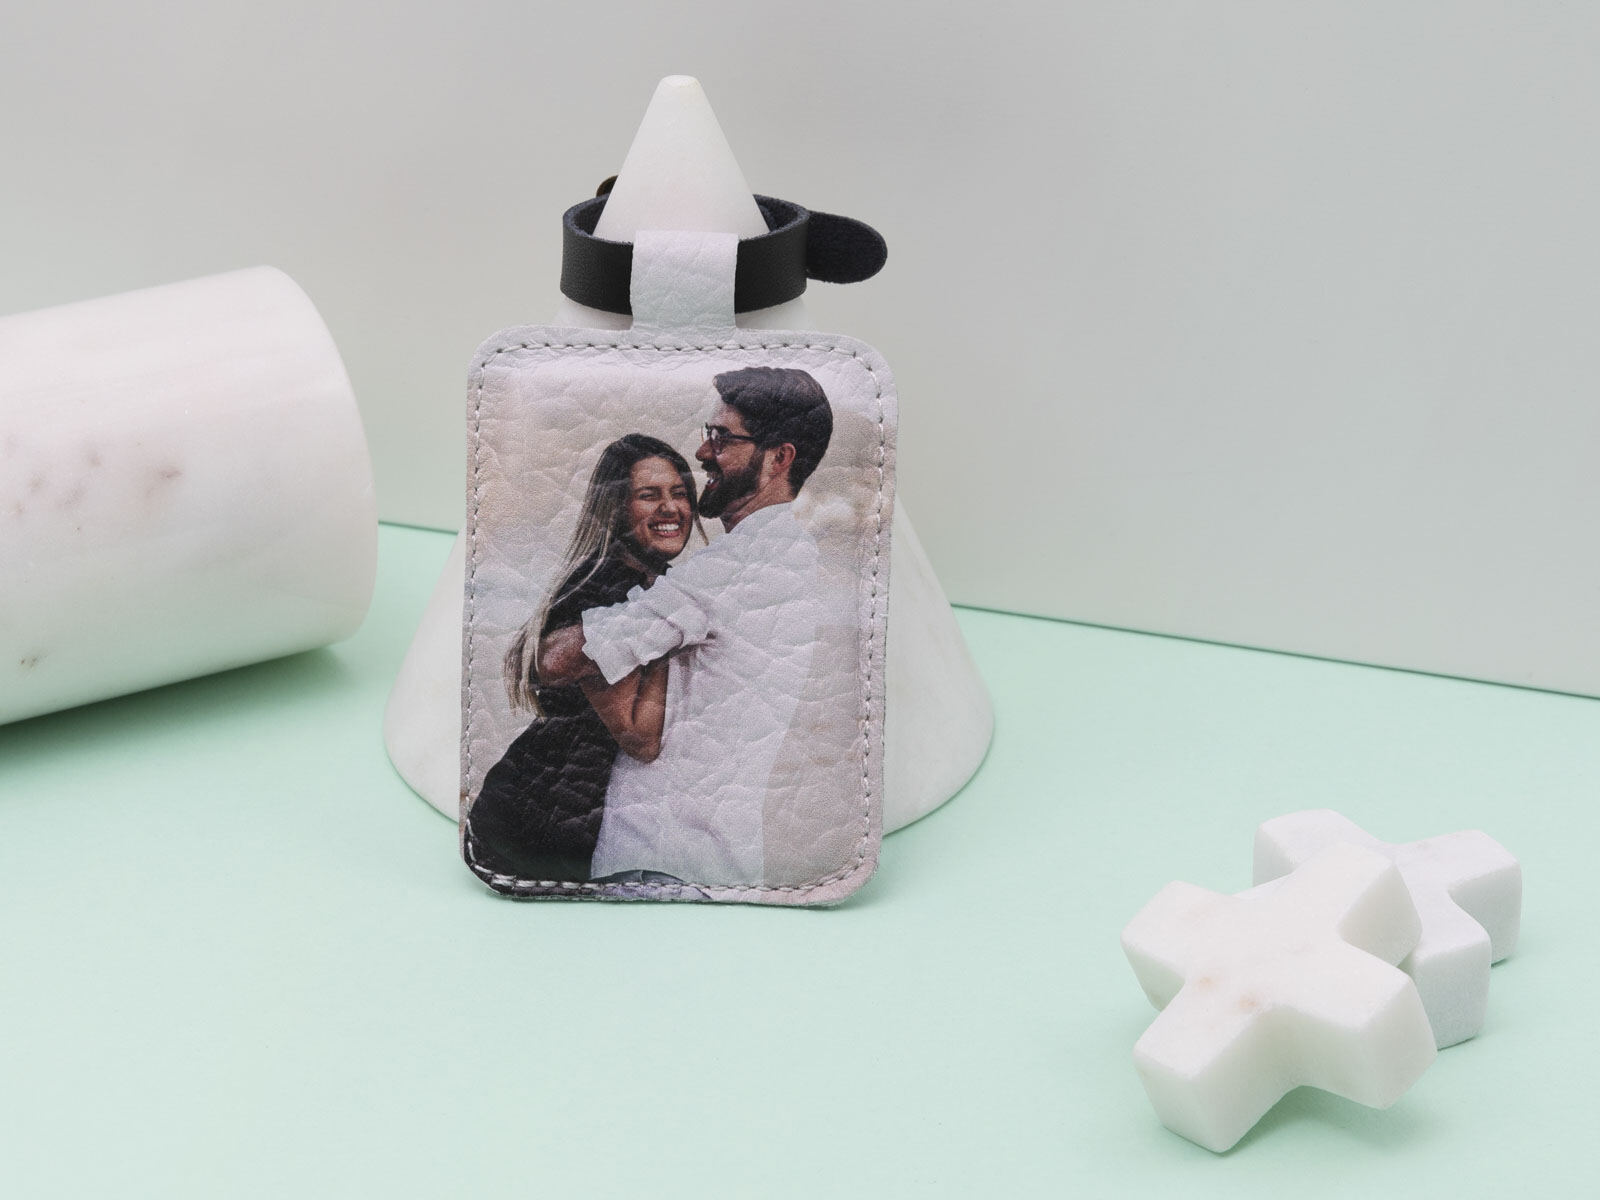 Personalized Gifts for the Bride